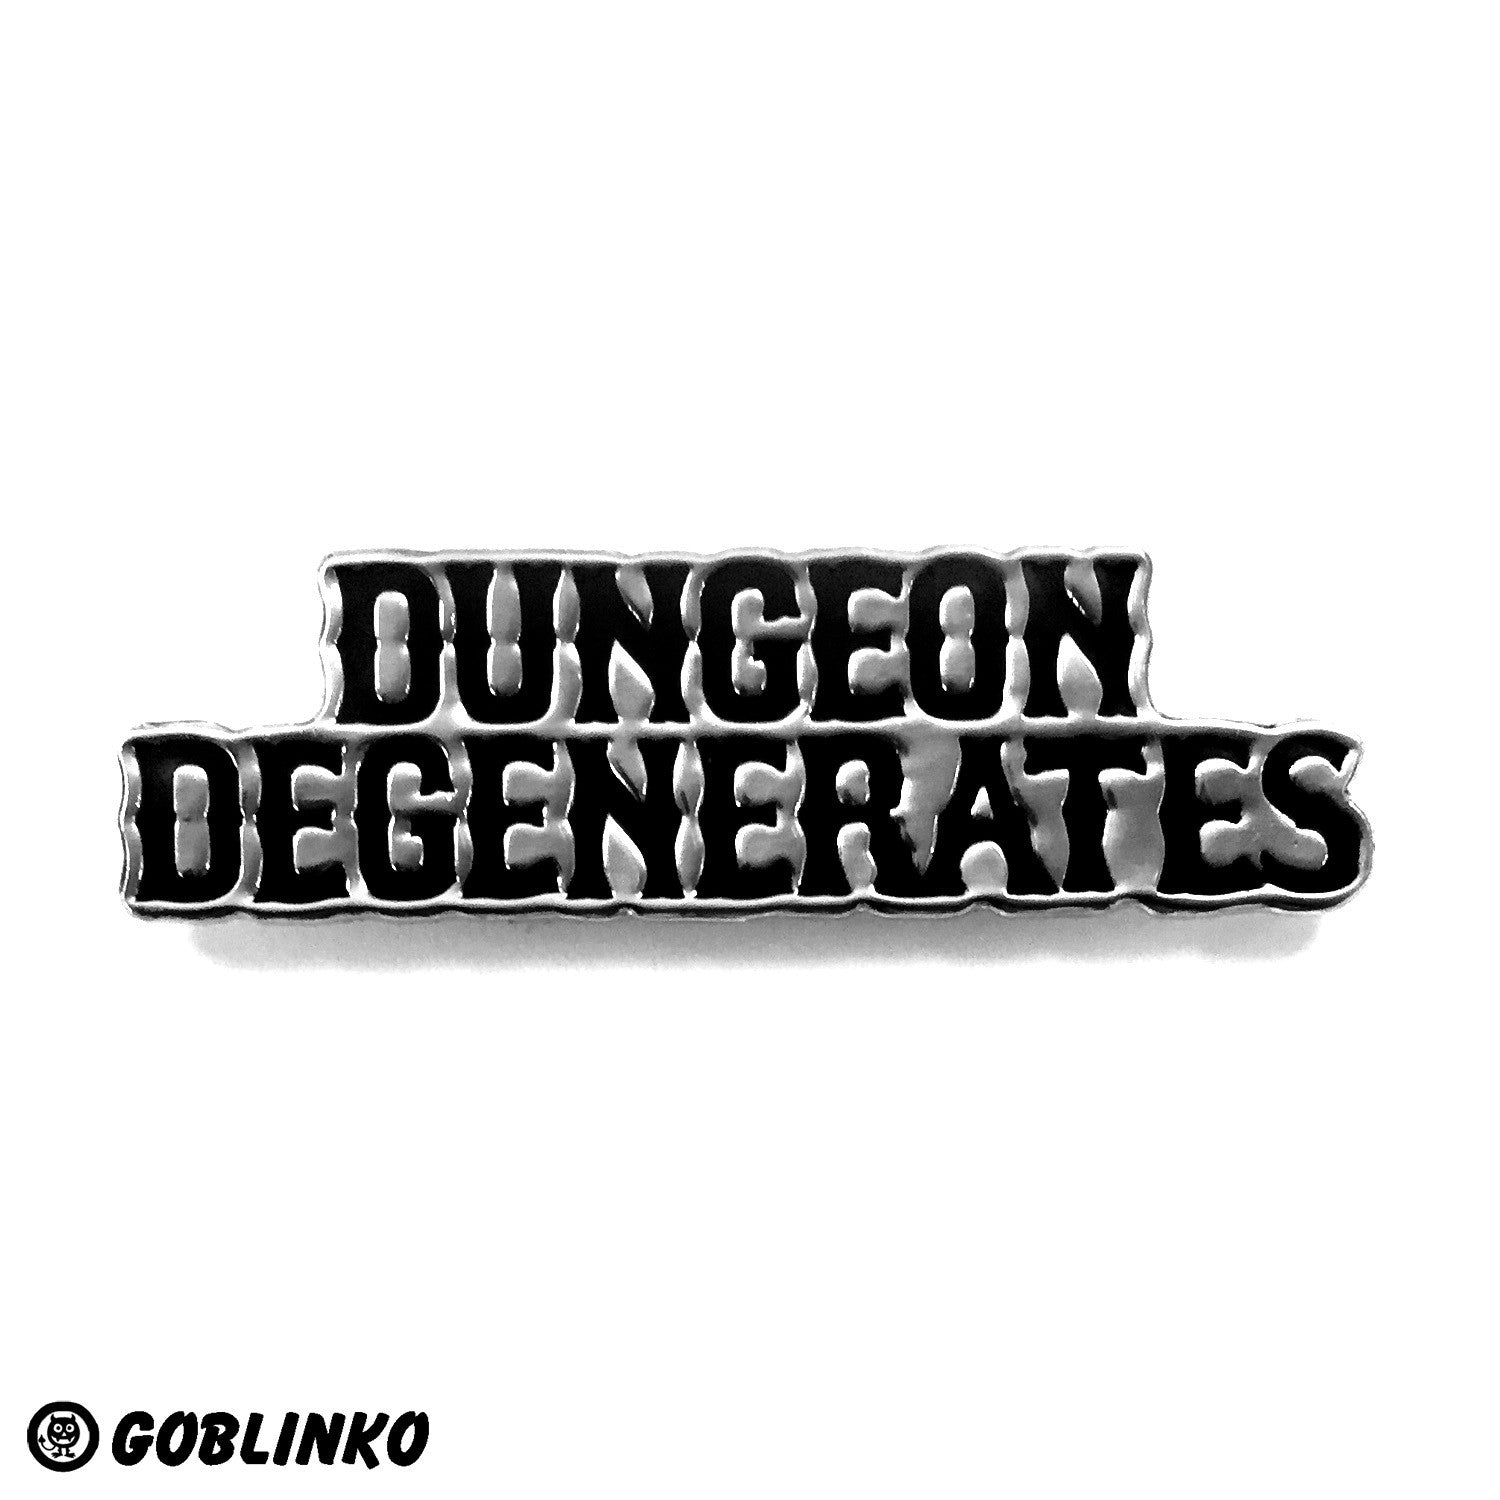 Dungeon Degenerates - Letters Pin